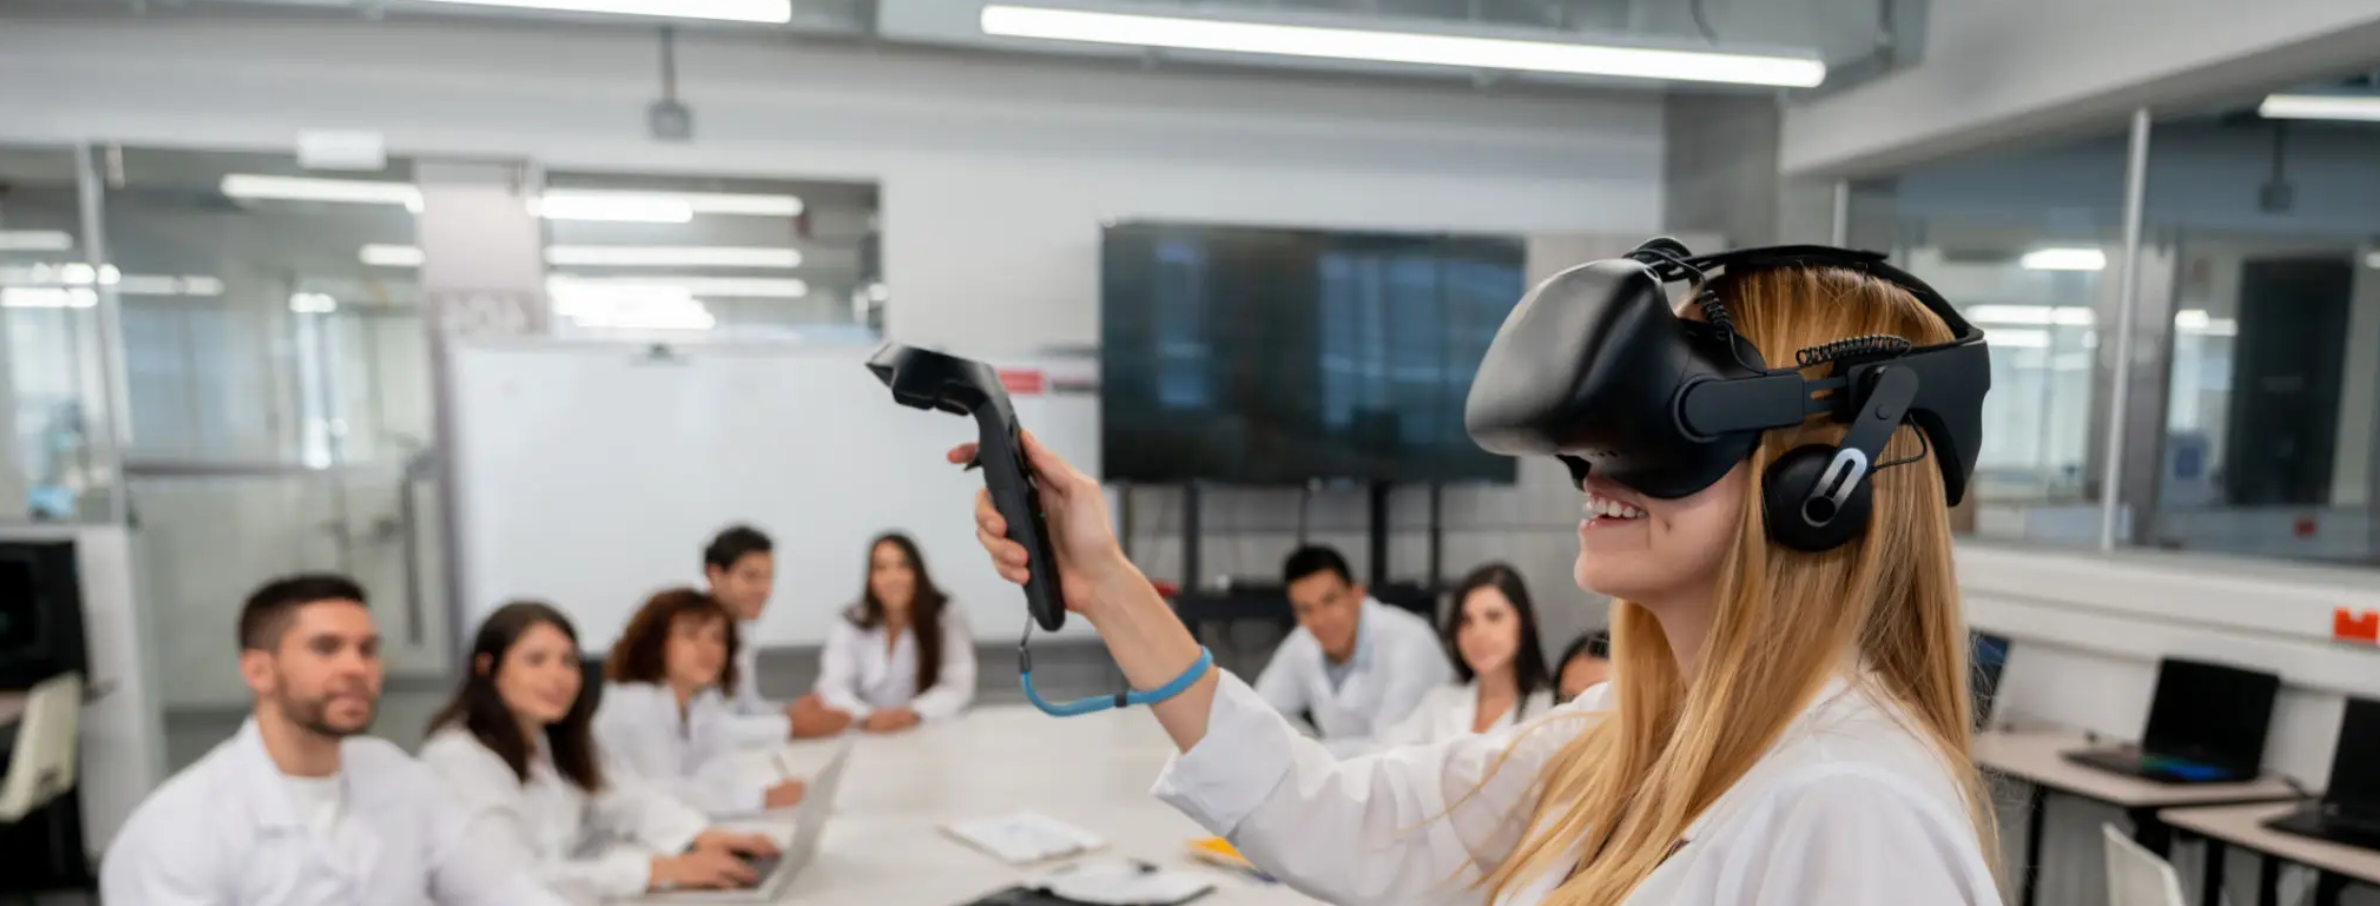 Woman in lab coat using VR headset for training